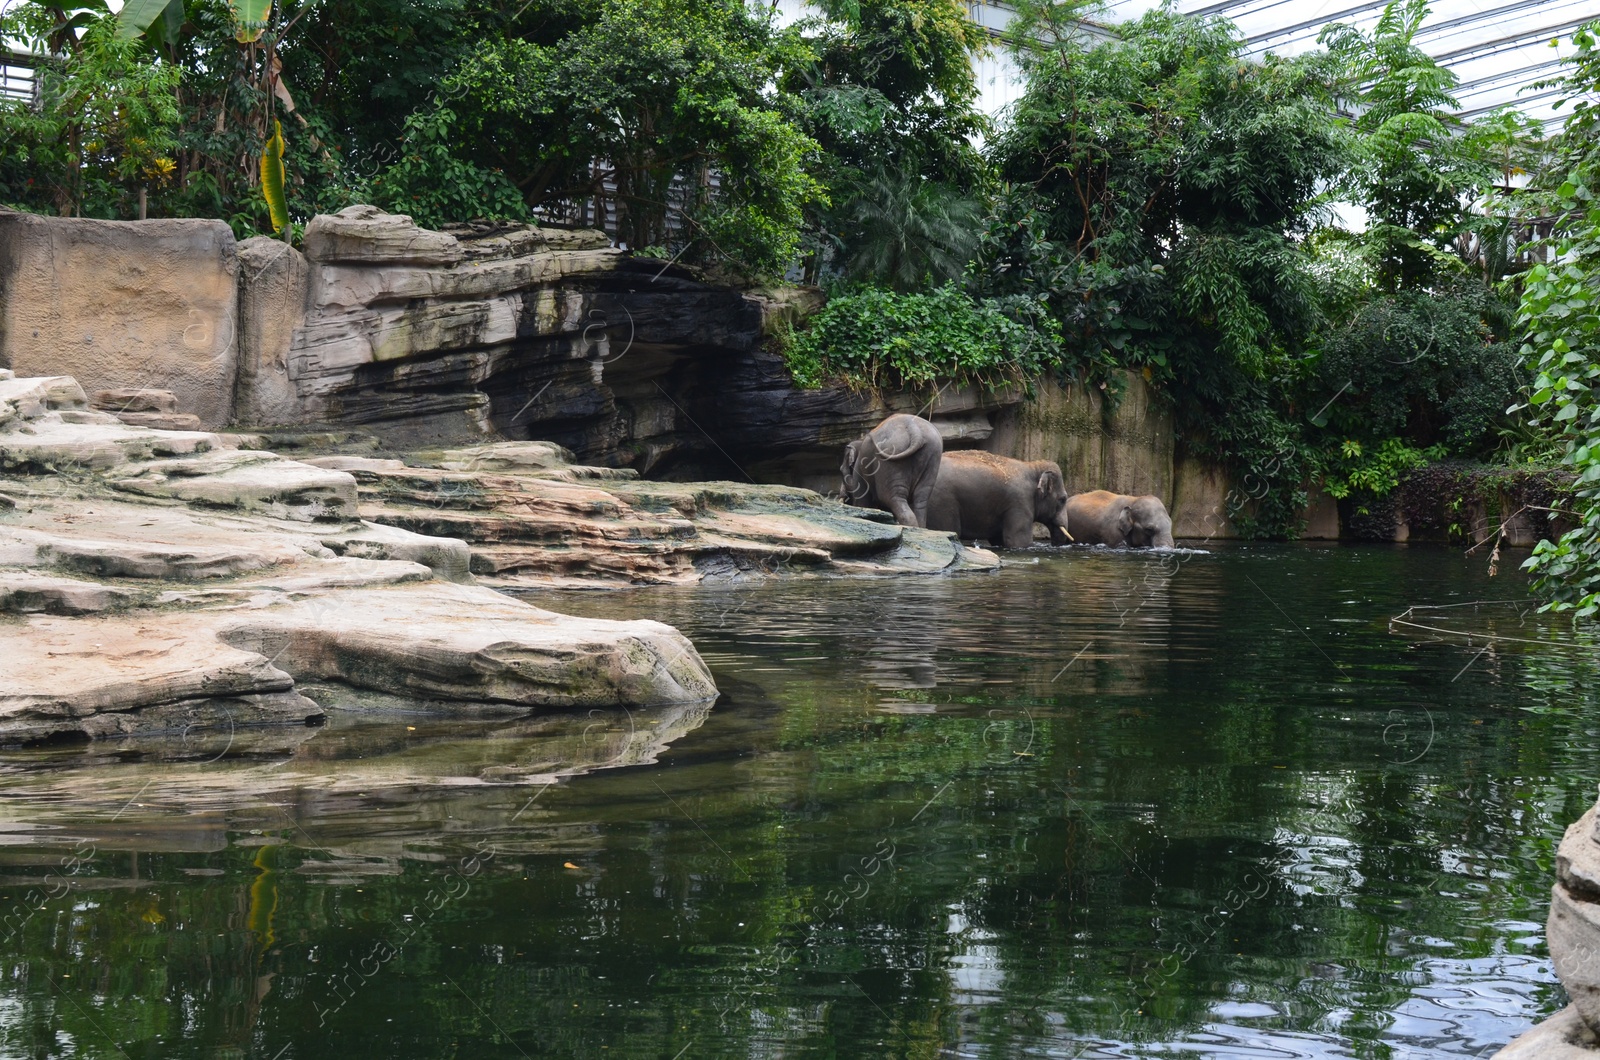 Photo of Group of elephants in pool at zoo enclosure